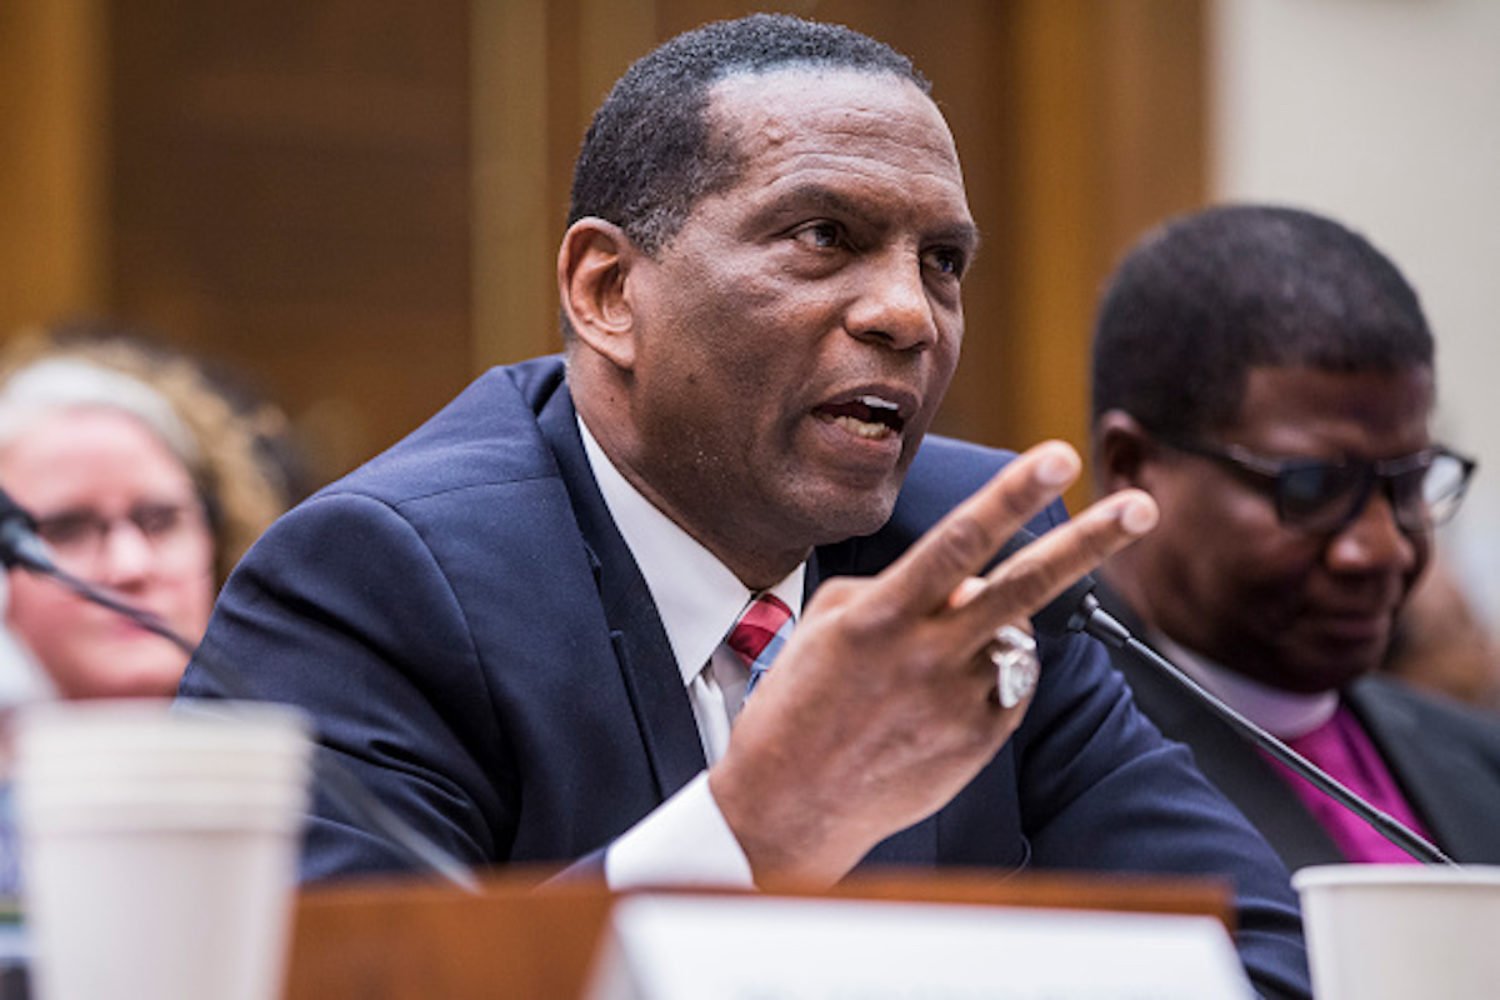 Former NFL player Burgess Owens testifies during a hearing on slavery reparations held by the House Judiciary Subcommittee on the Constitution, Civil Rights and Civil Liberties on June 19, 2019 in Washington, DC. The subcommittee debated the H.R. 40 bill, which proposes a commission be formed to study and develop reparation proposals for African-Americans. (Photo by Zach Gibson/Getty Images)